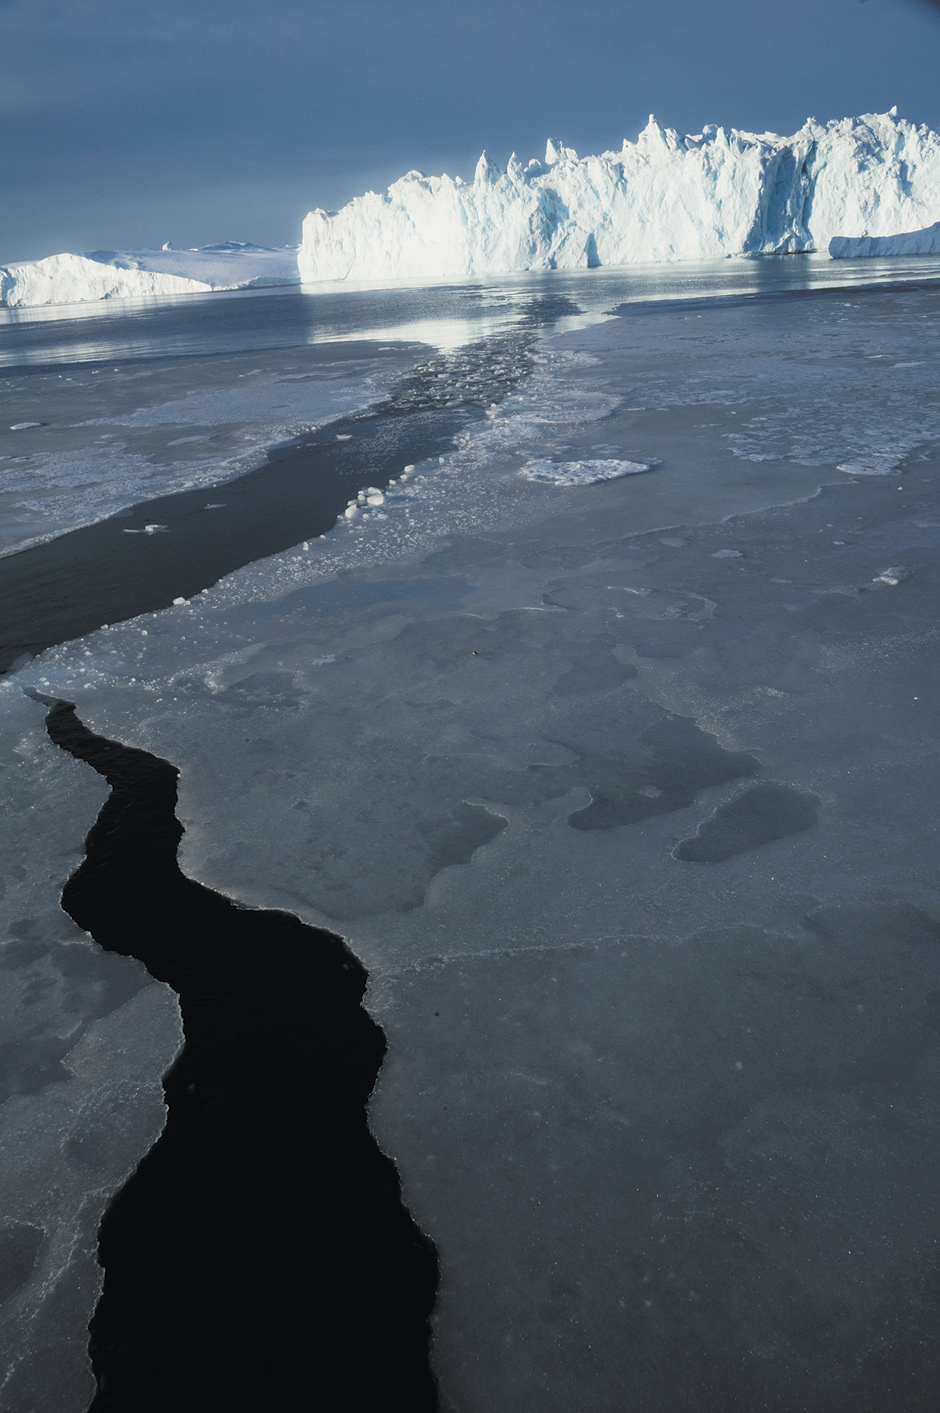 Greenland, photographed from a boat navigating the melt where dog sleds used to travel across the ice, October 2009